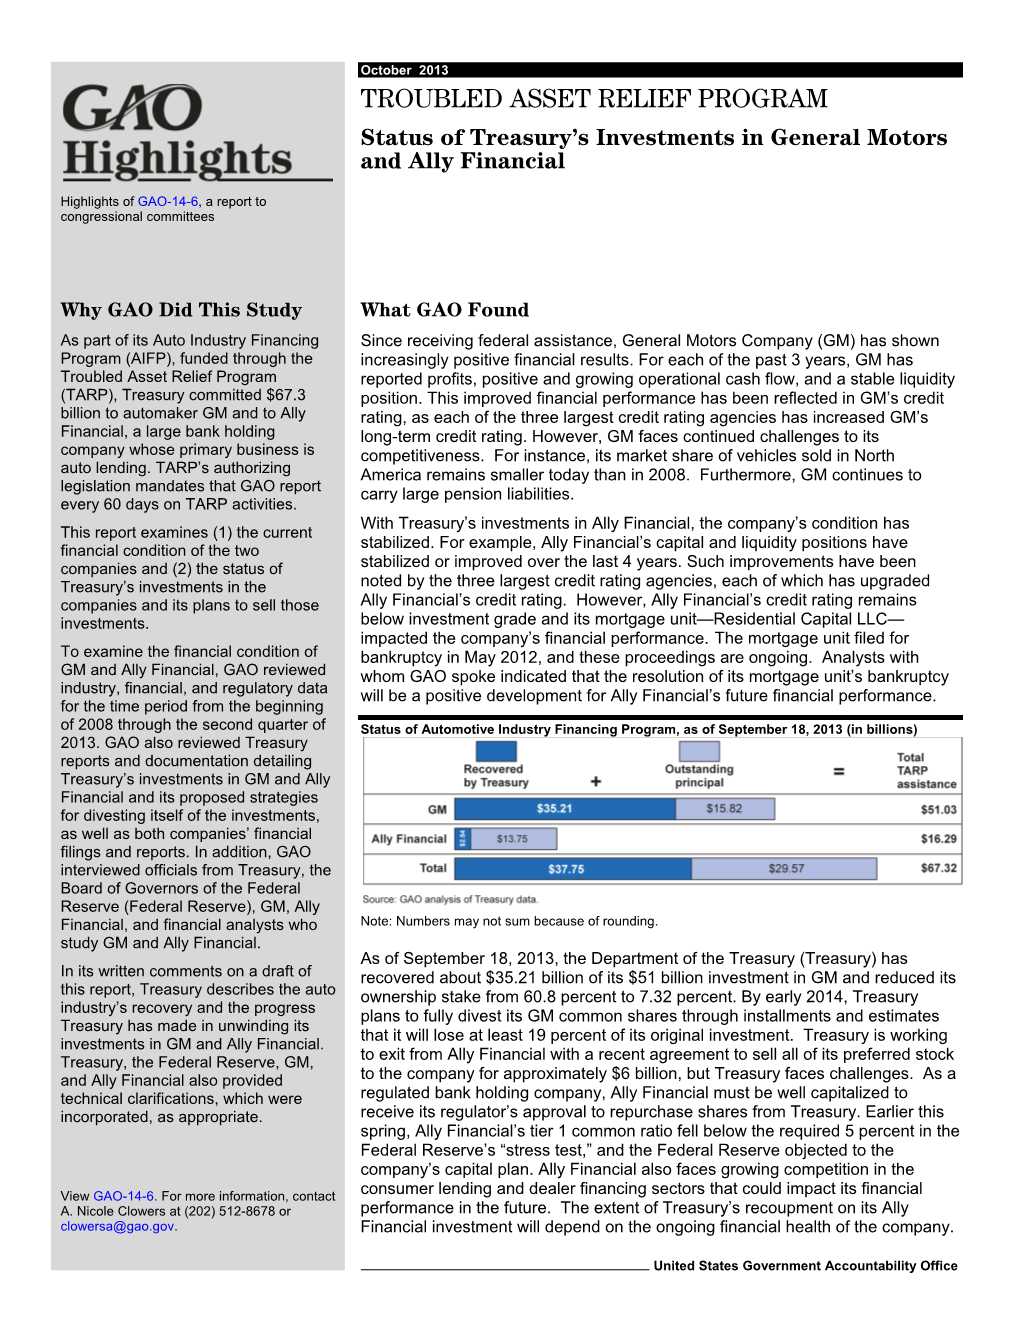 GAO-14-6 Highlights, TROUBLED ASSET RELIEF PROGRAM: Status